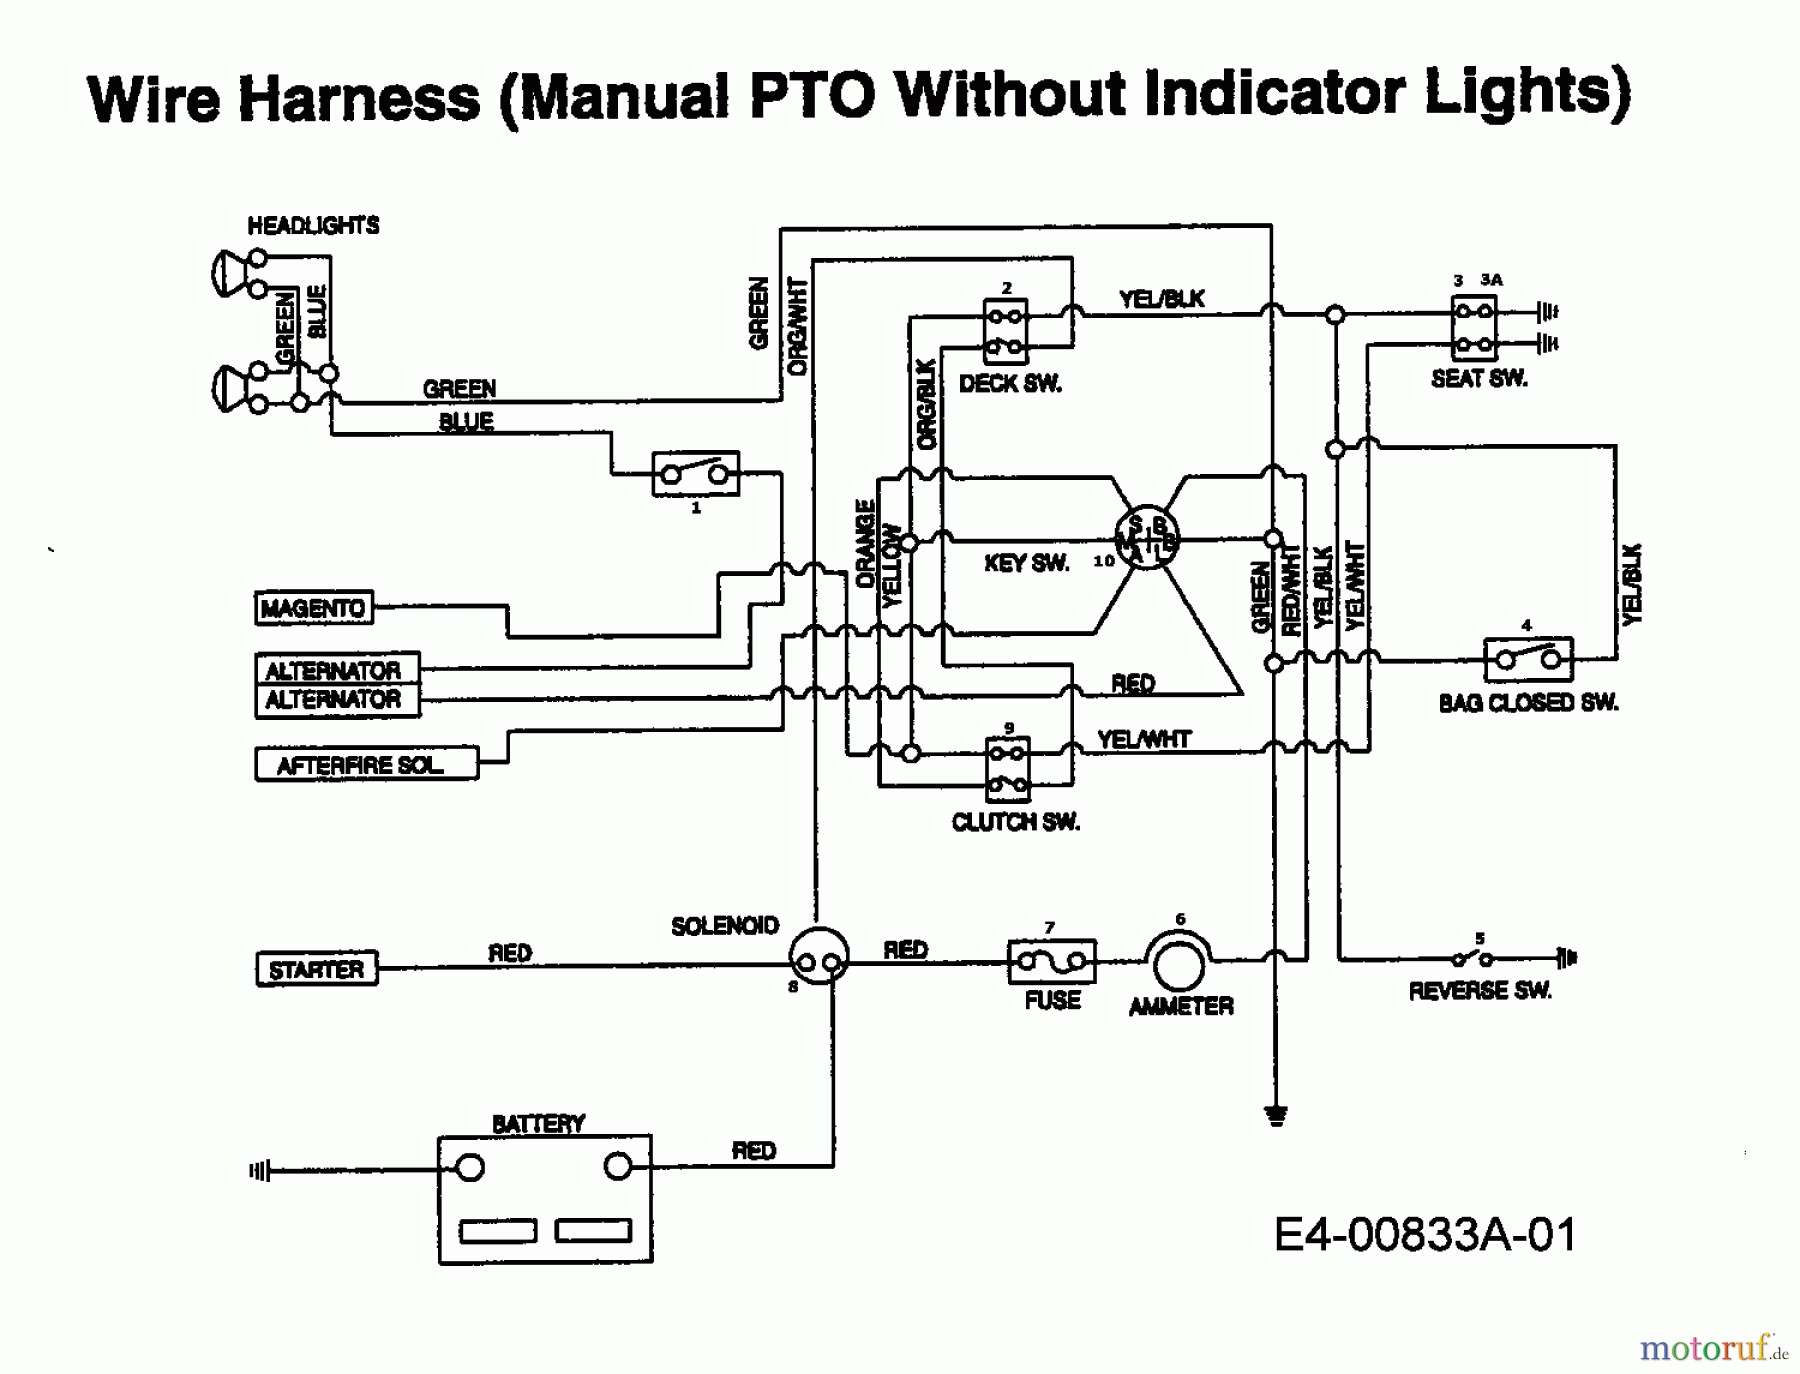  Yard-Man Lawn tractors HN 7155 13A1794N643  (1997) Wiring diagram without indicator lights